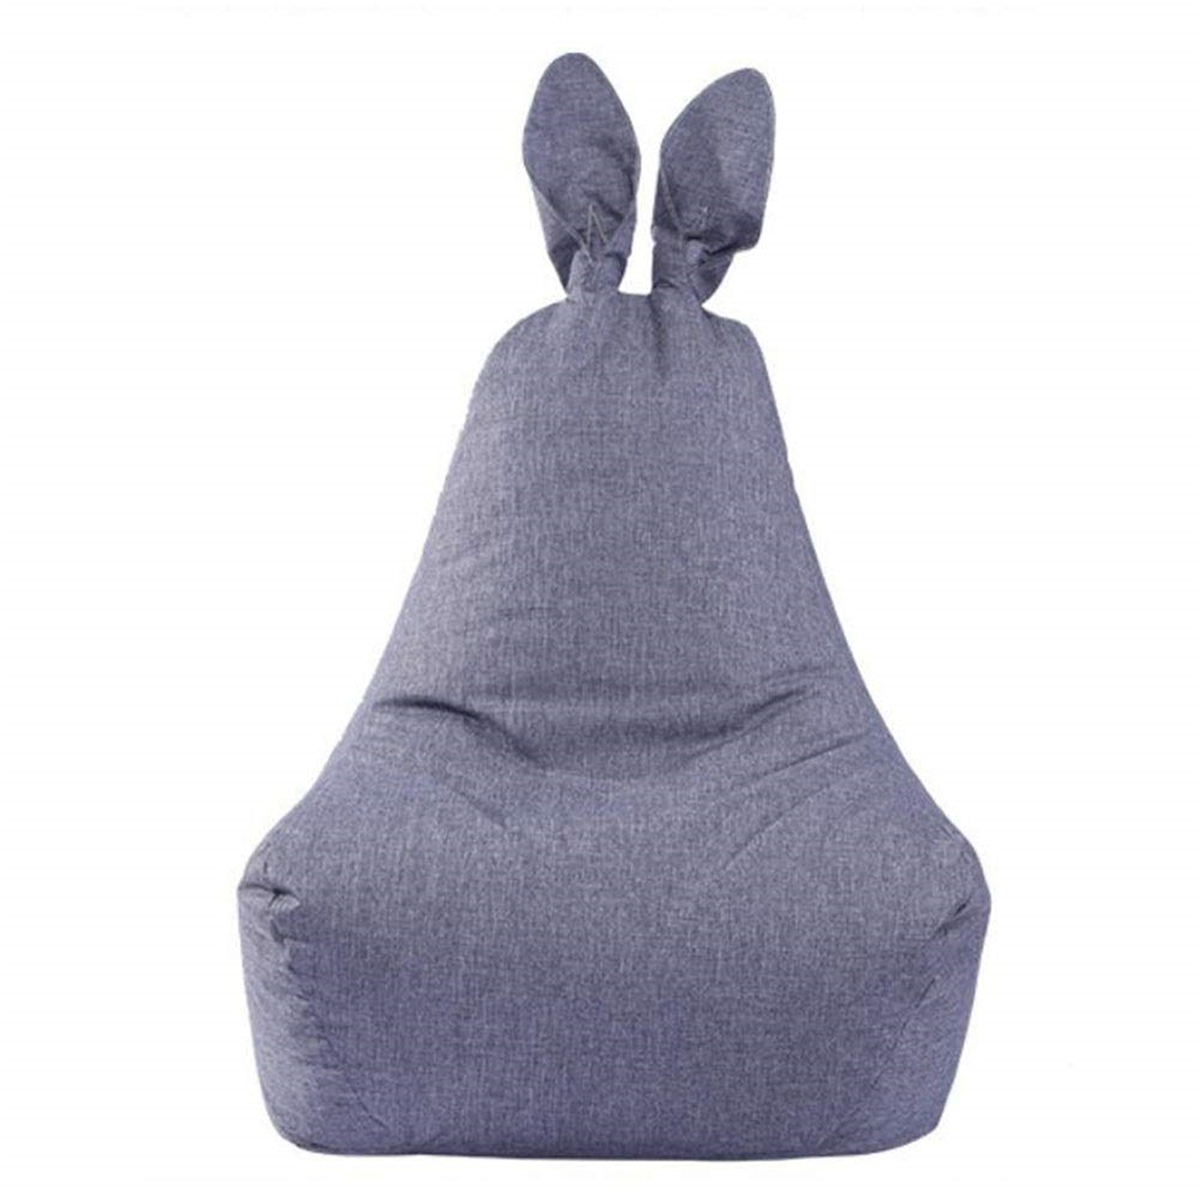 Rabbit-Shape-Bean-Bag-Chair-Seat-Sofa-Cover-For-Adults-Kids-Without-Filling-Home-Room-1566395-10